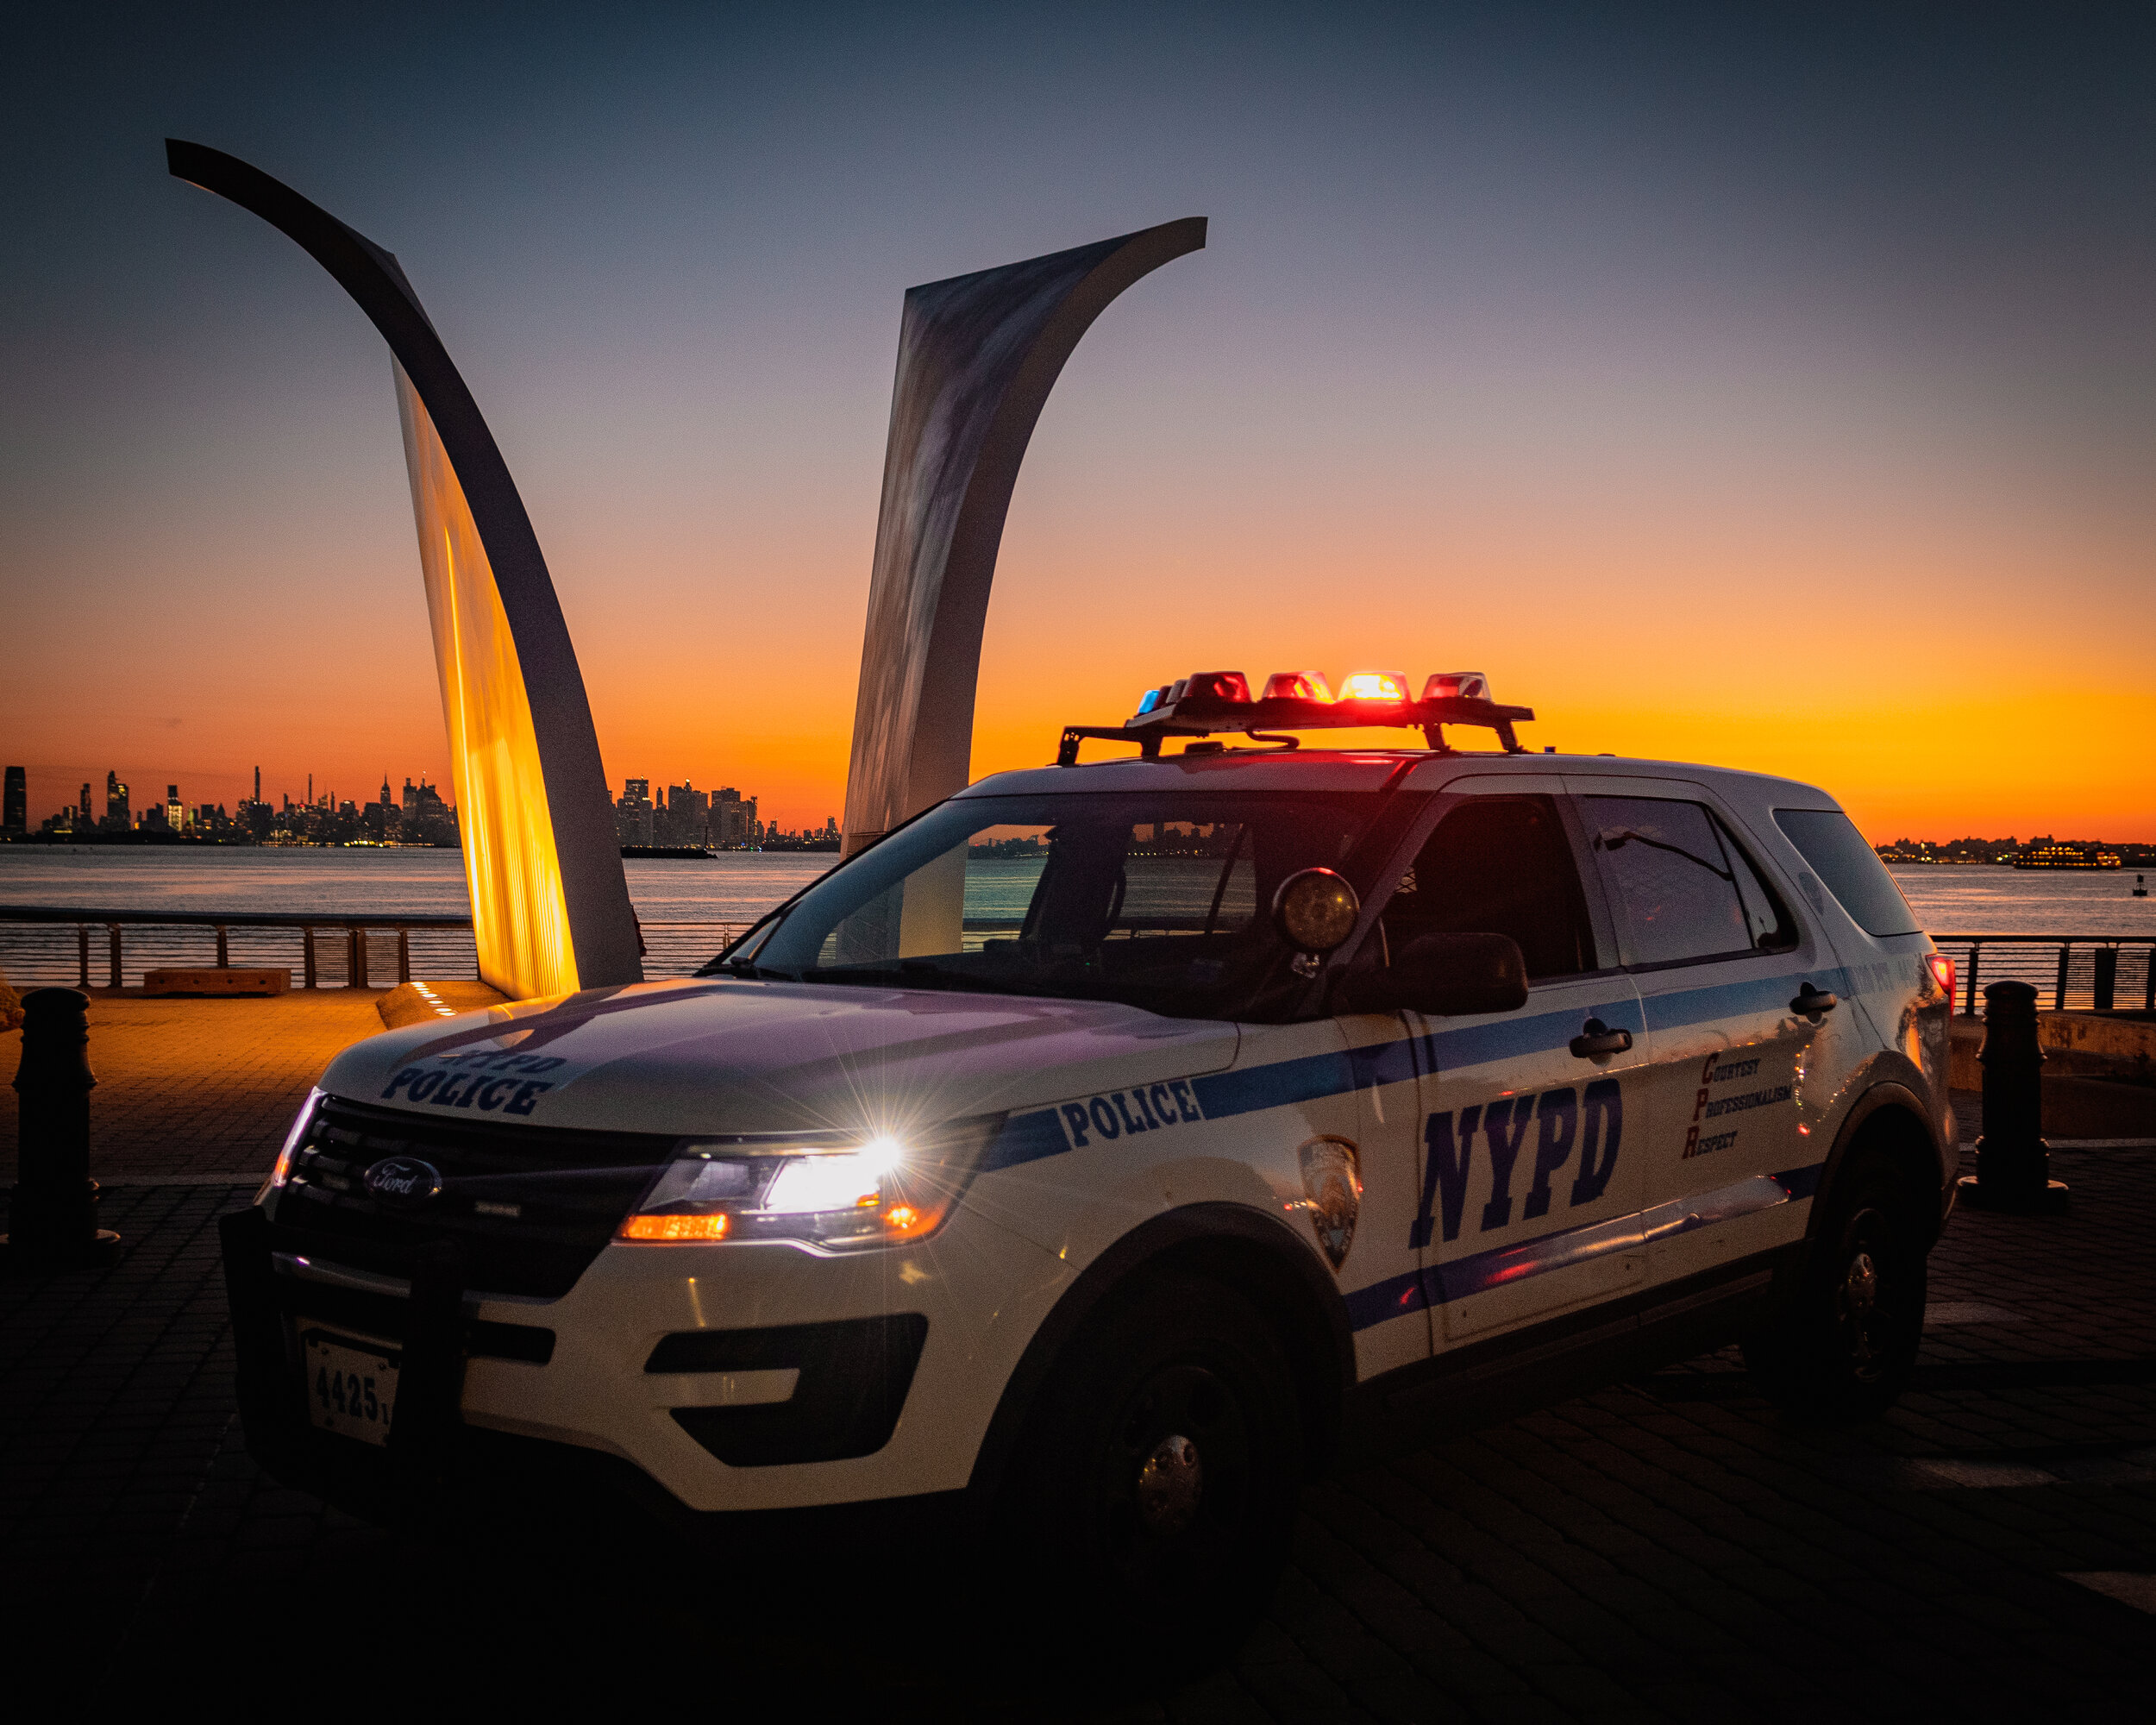  Sunrise at Staton Islands Post Card 9-11 Memorial. Was lucky to have captured an NYPD patrol vehicle that morning. Really brought all of the elements of the photo together.  